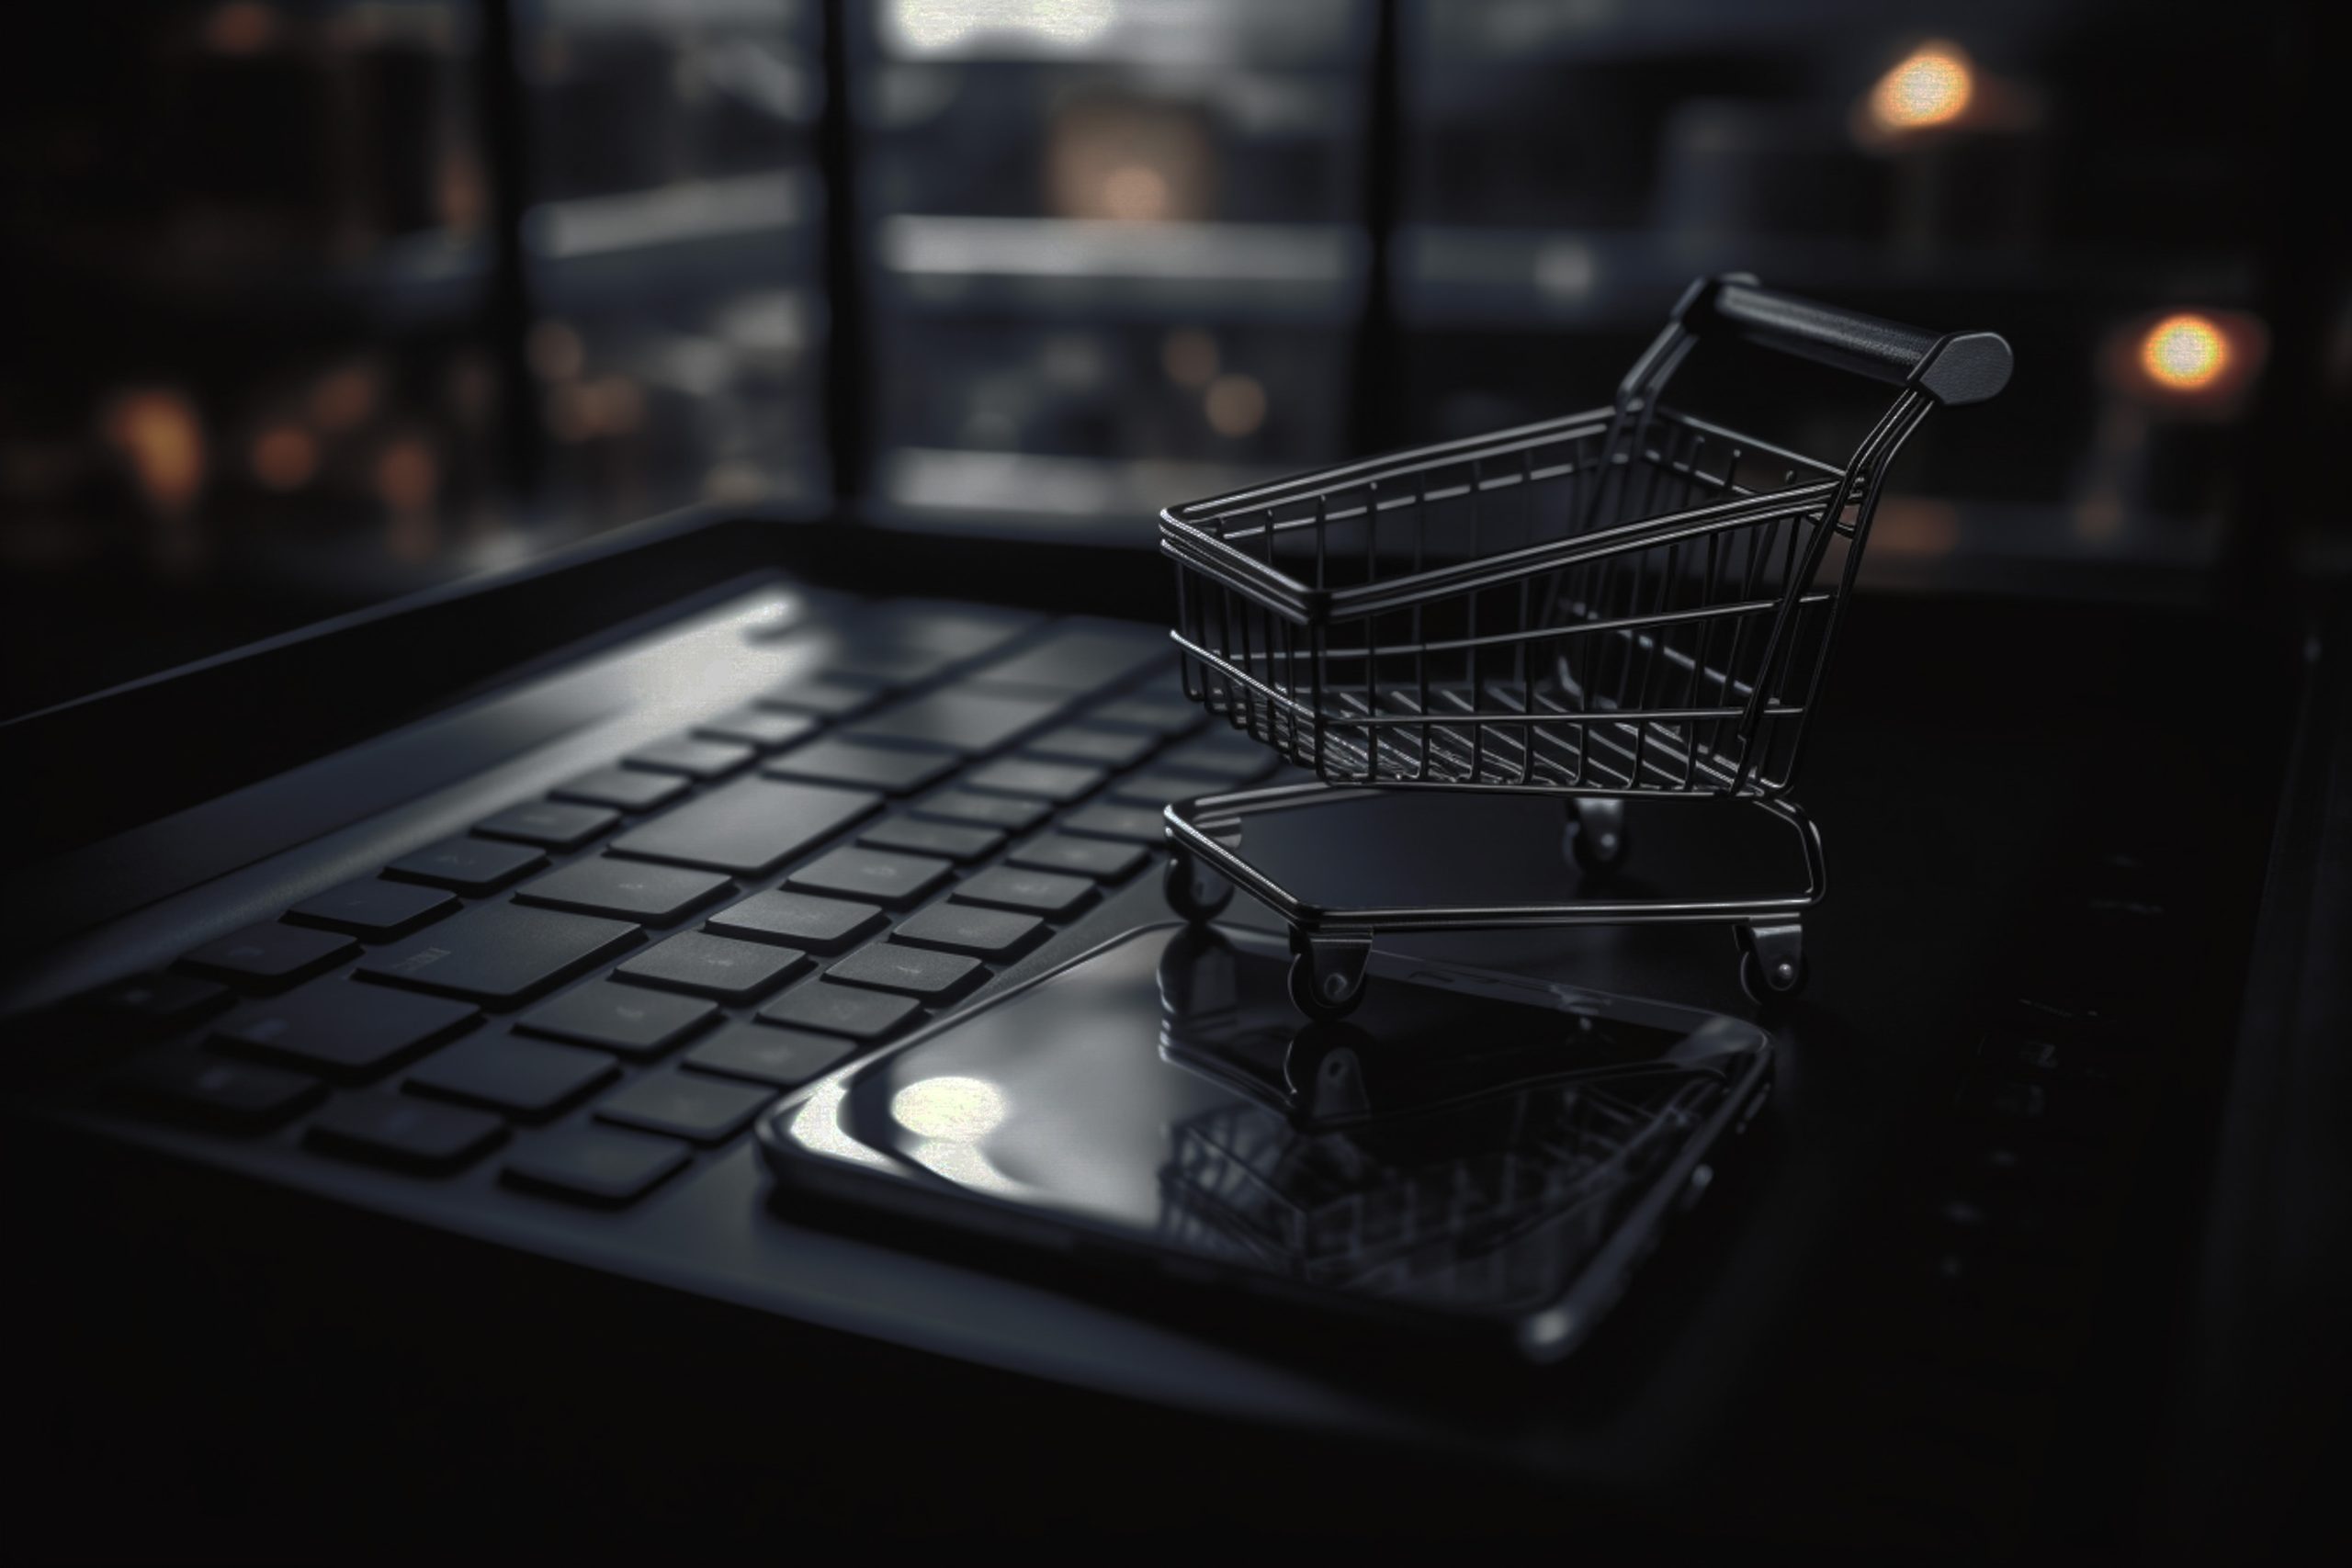 shopping cart sits laptop keyboard with lit window it scaled